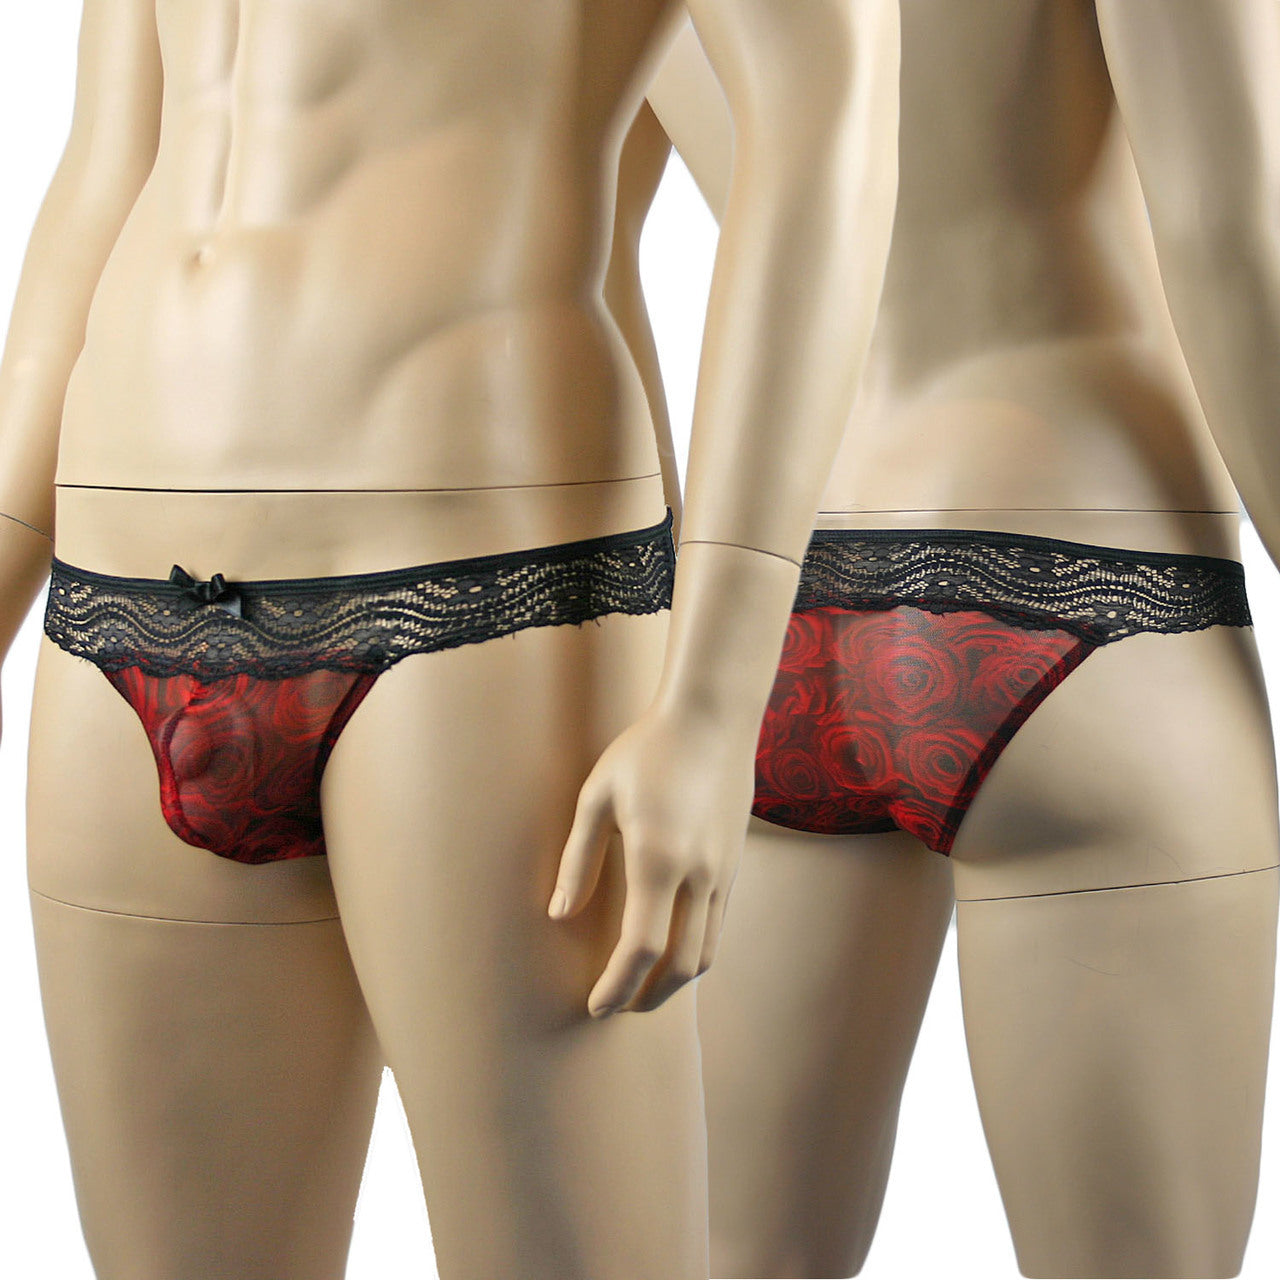 Mens Roses Bikini Brief, Sexy Sheer Lingerie Underwear Red and Black Lace